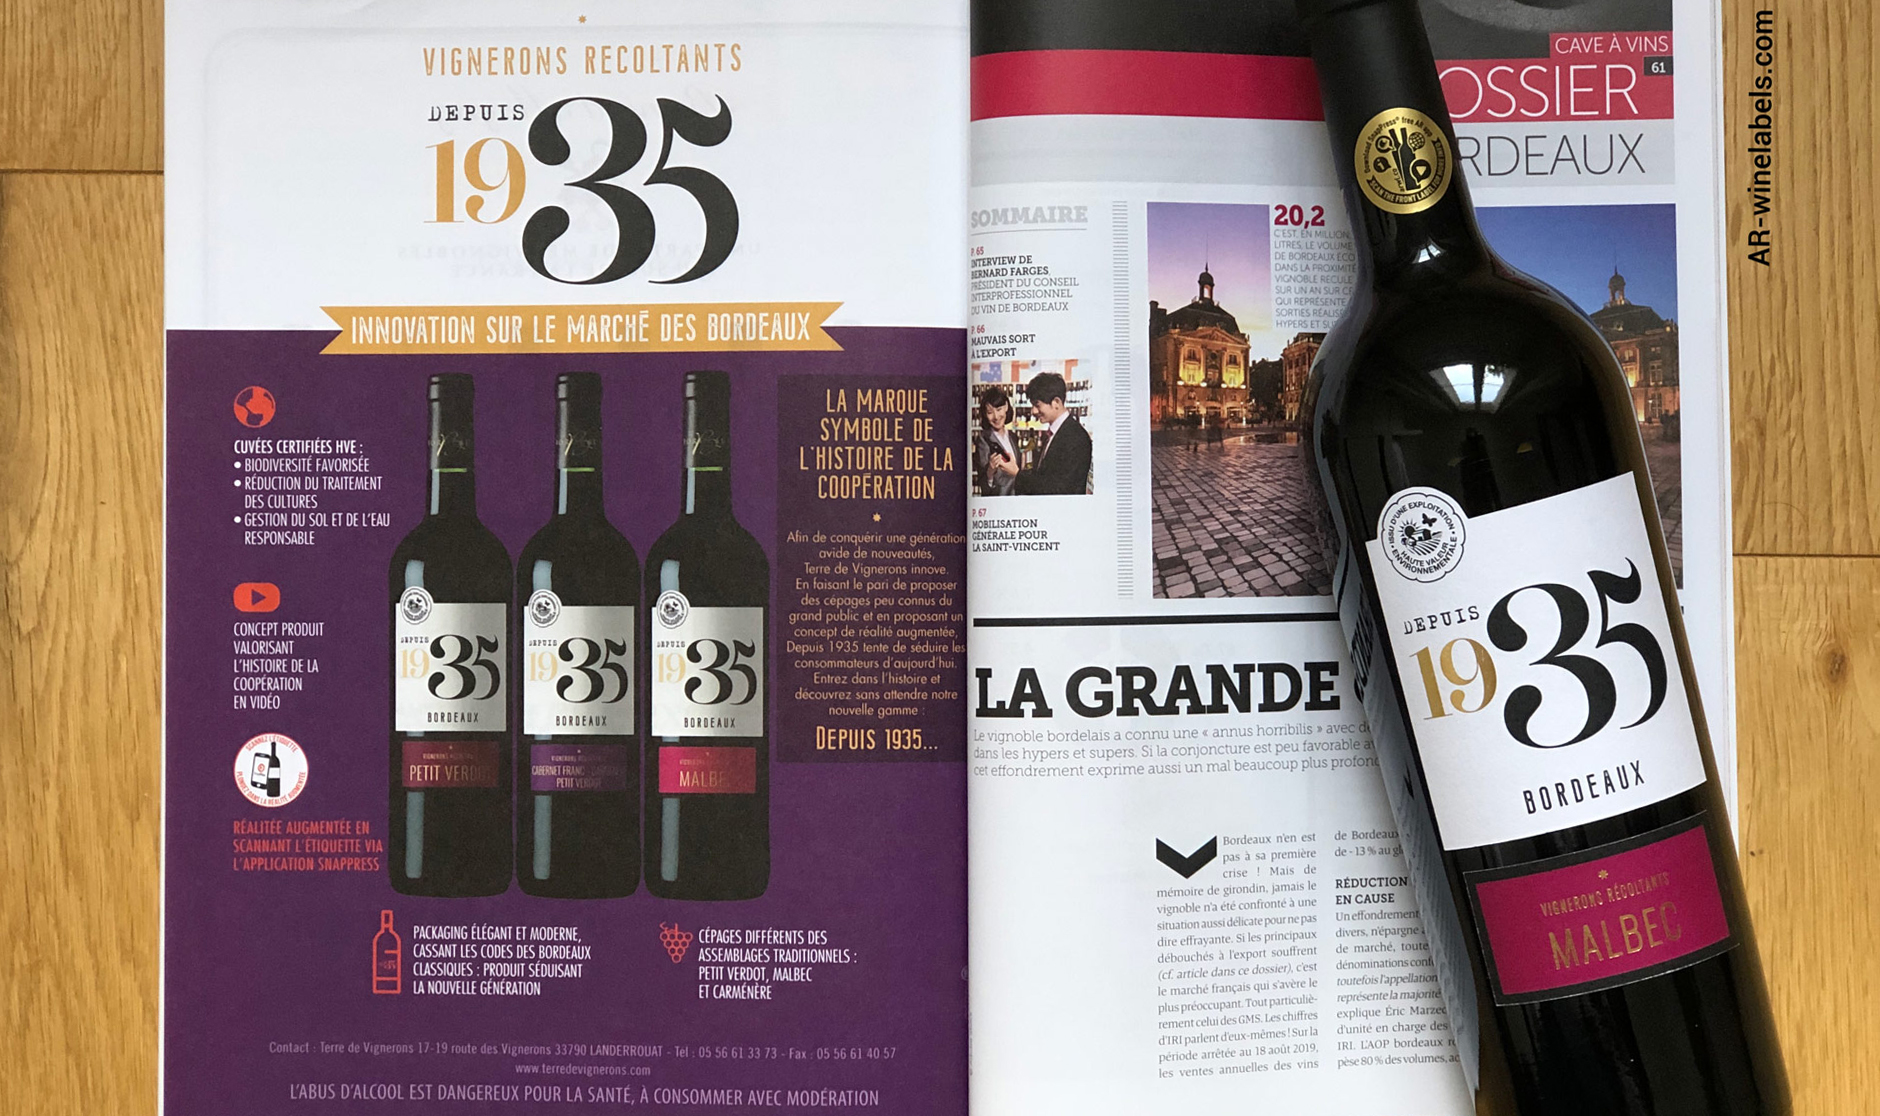 Rayon Boissons N°290 december 2019 - Launch of the range « Depuis 1395 » with connected ARWL’s wine labels.